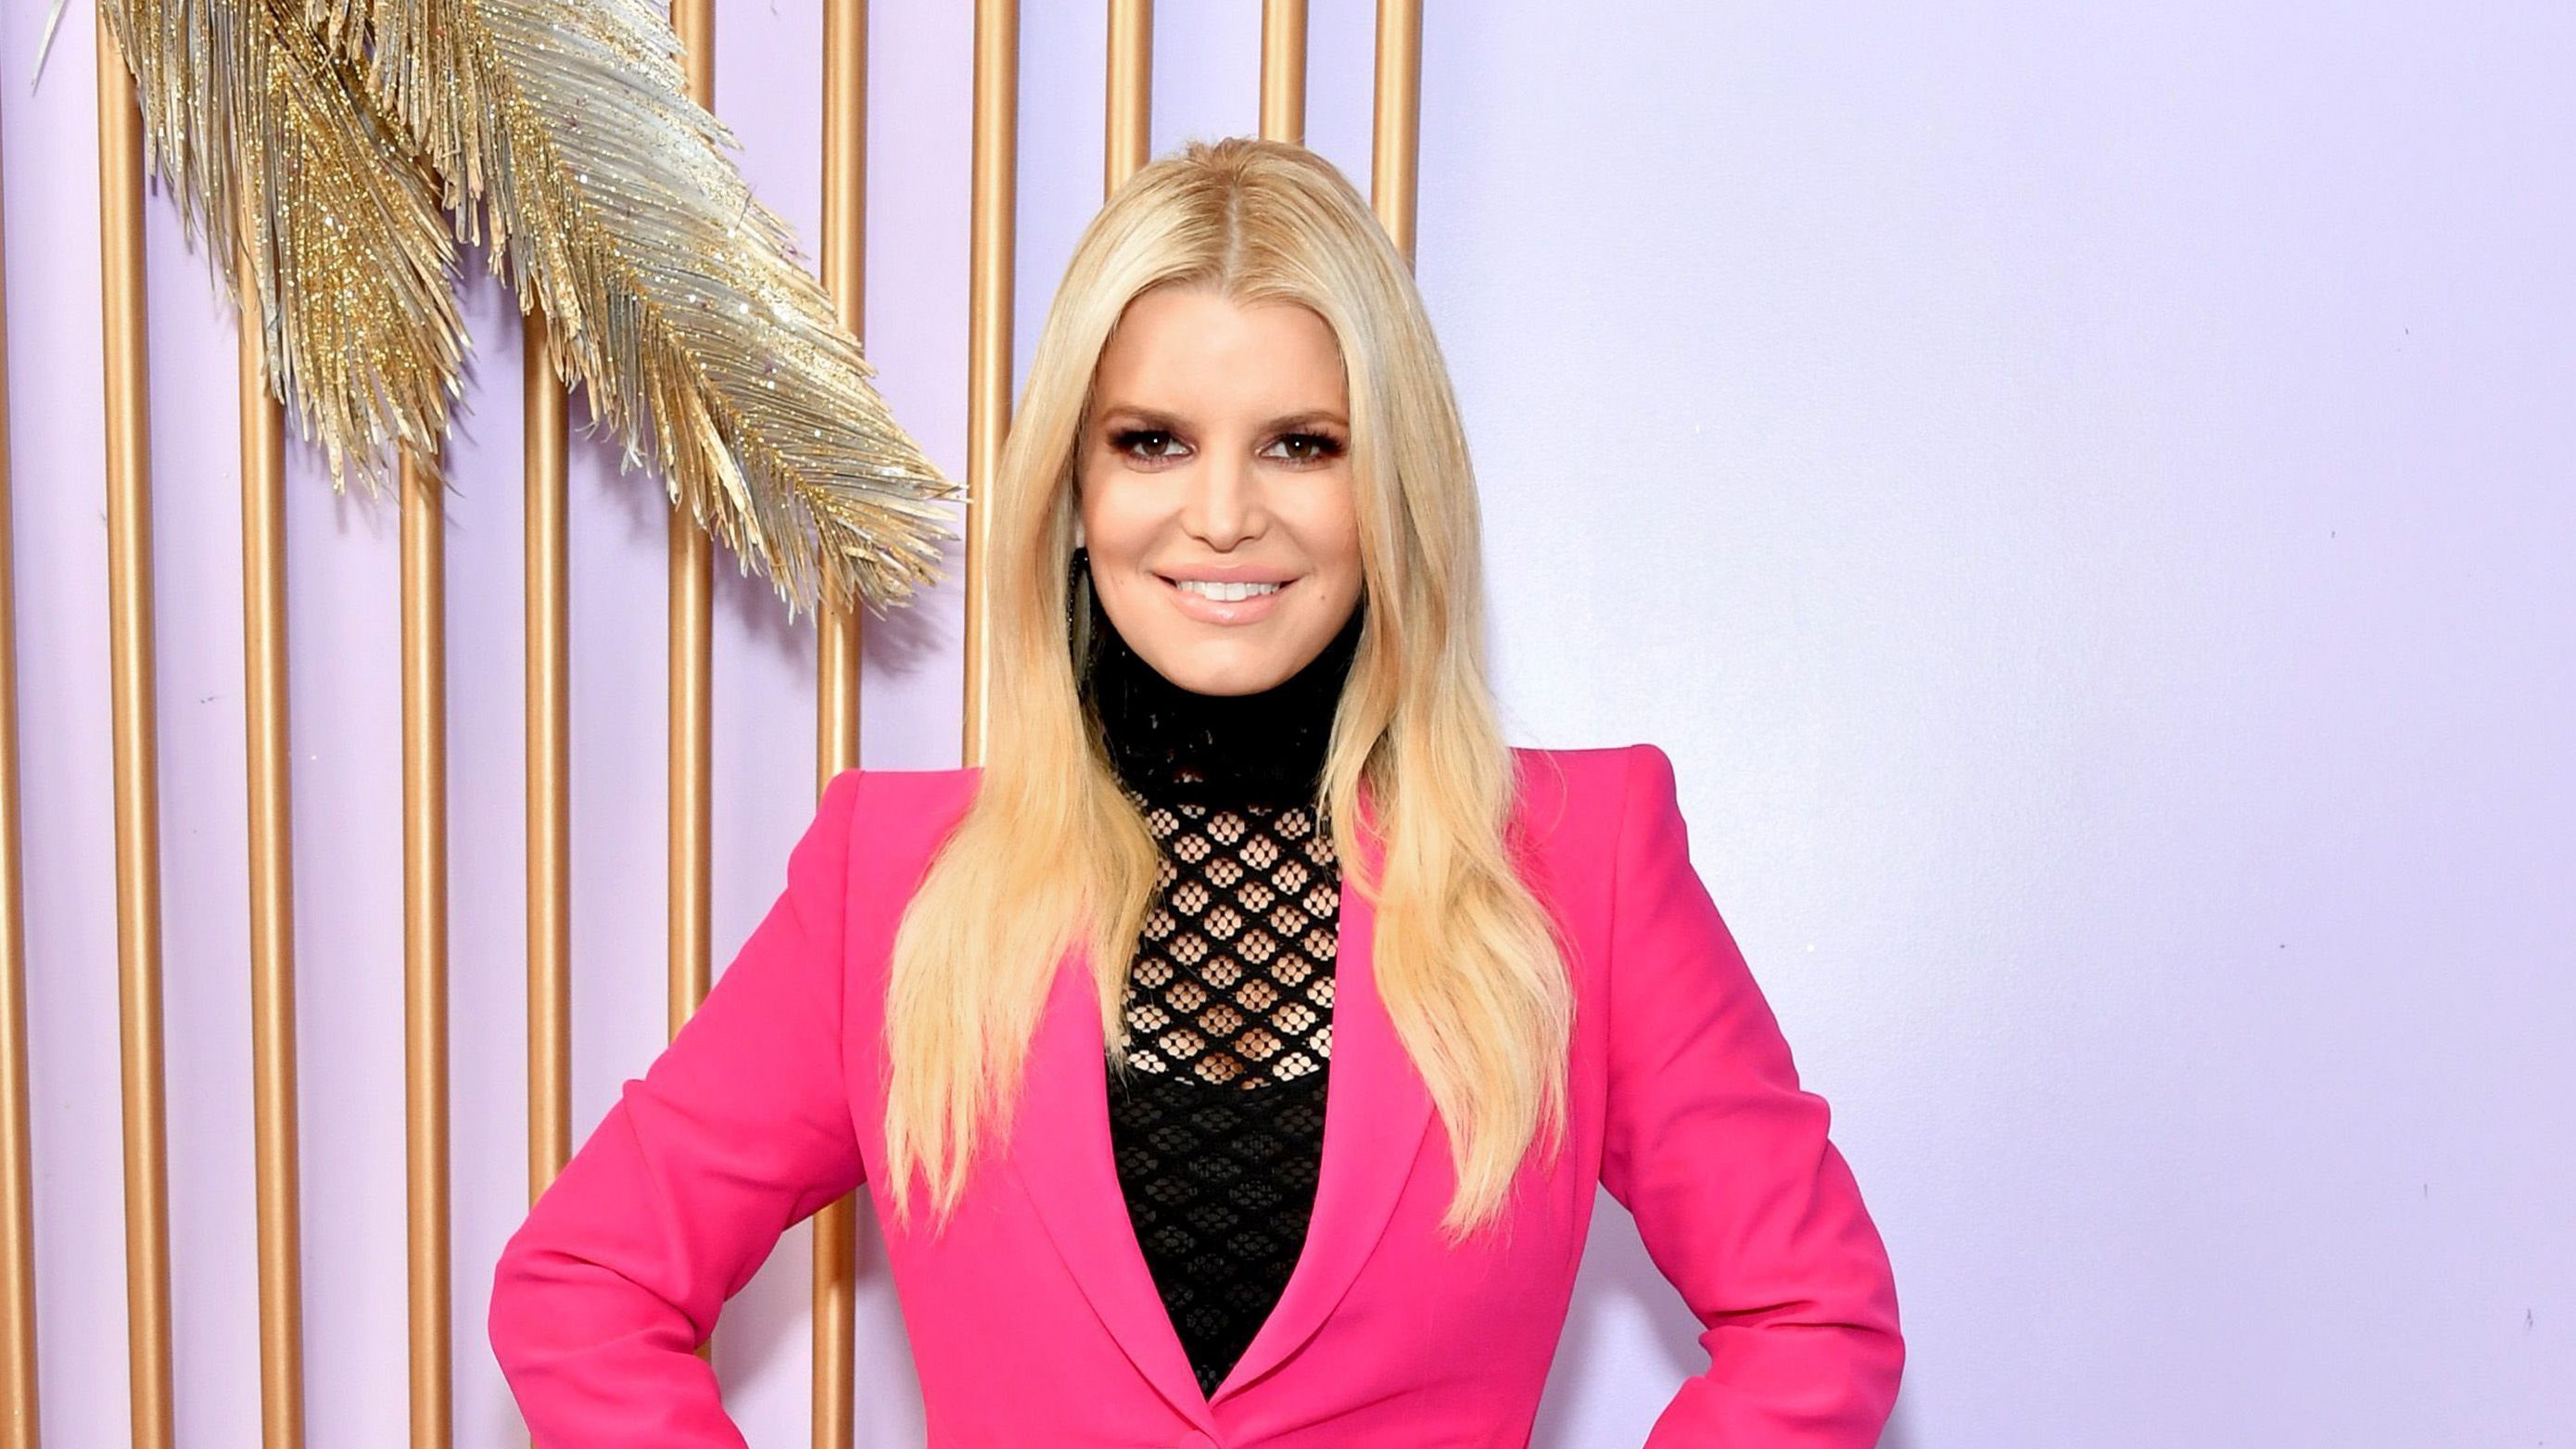 Jessica Simpson shows 50 kg weight loss in festive overalls